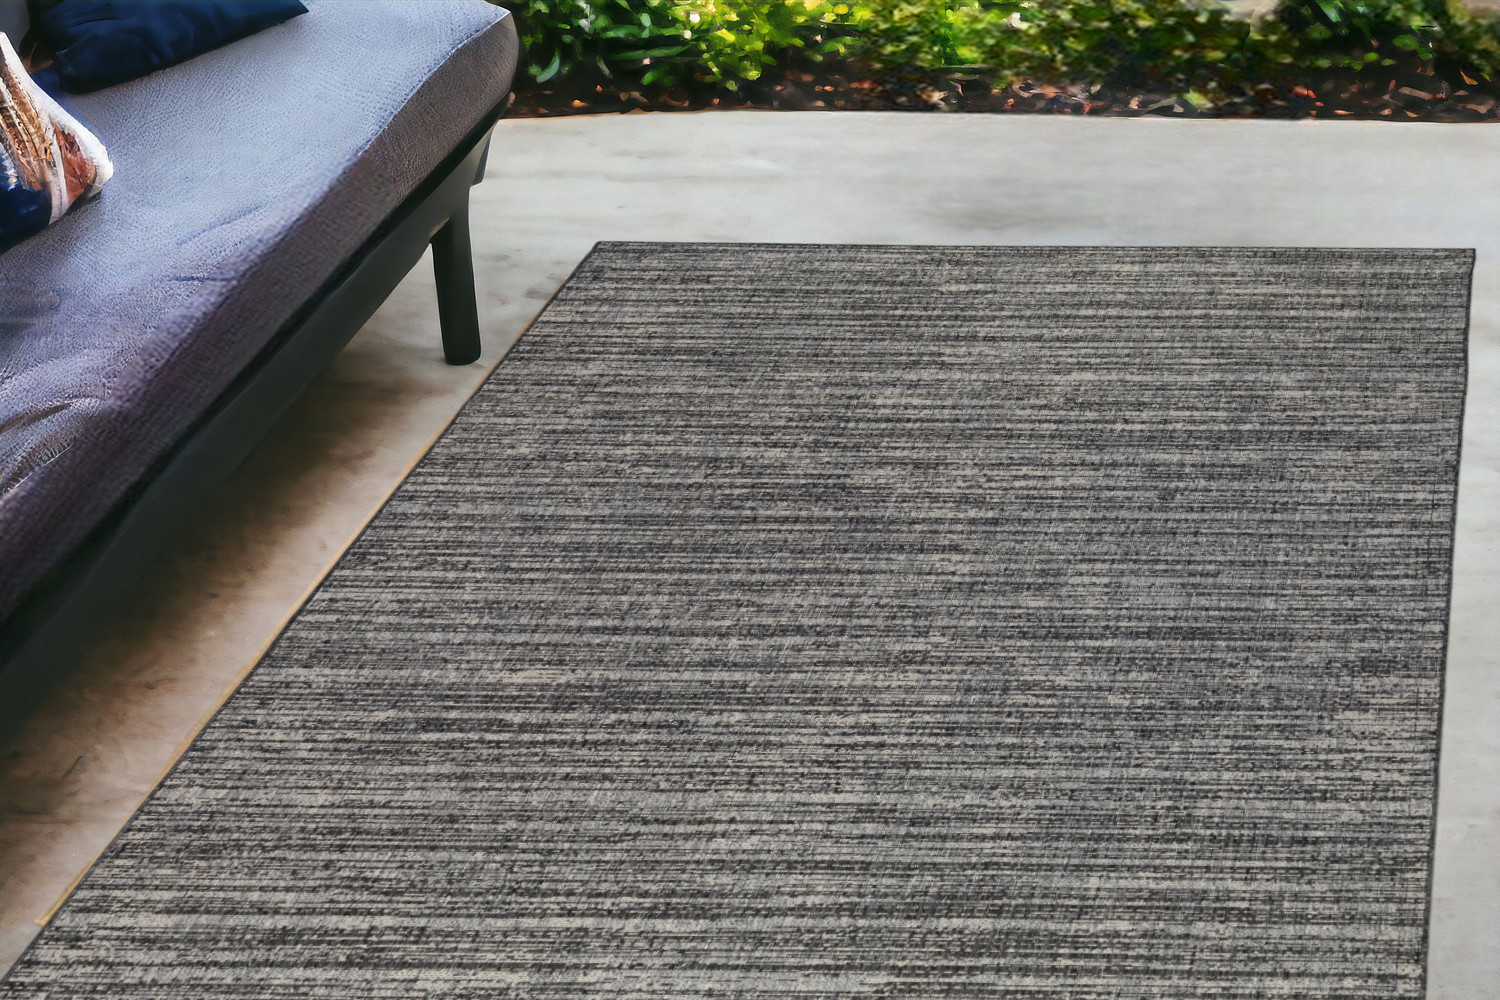 4' x 6' Brown and Ivory Striped Stain Resistant Indoor Outdoor Area Rug-531668-1